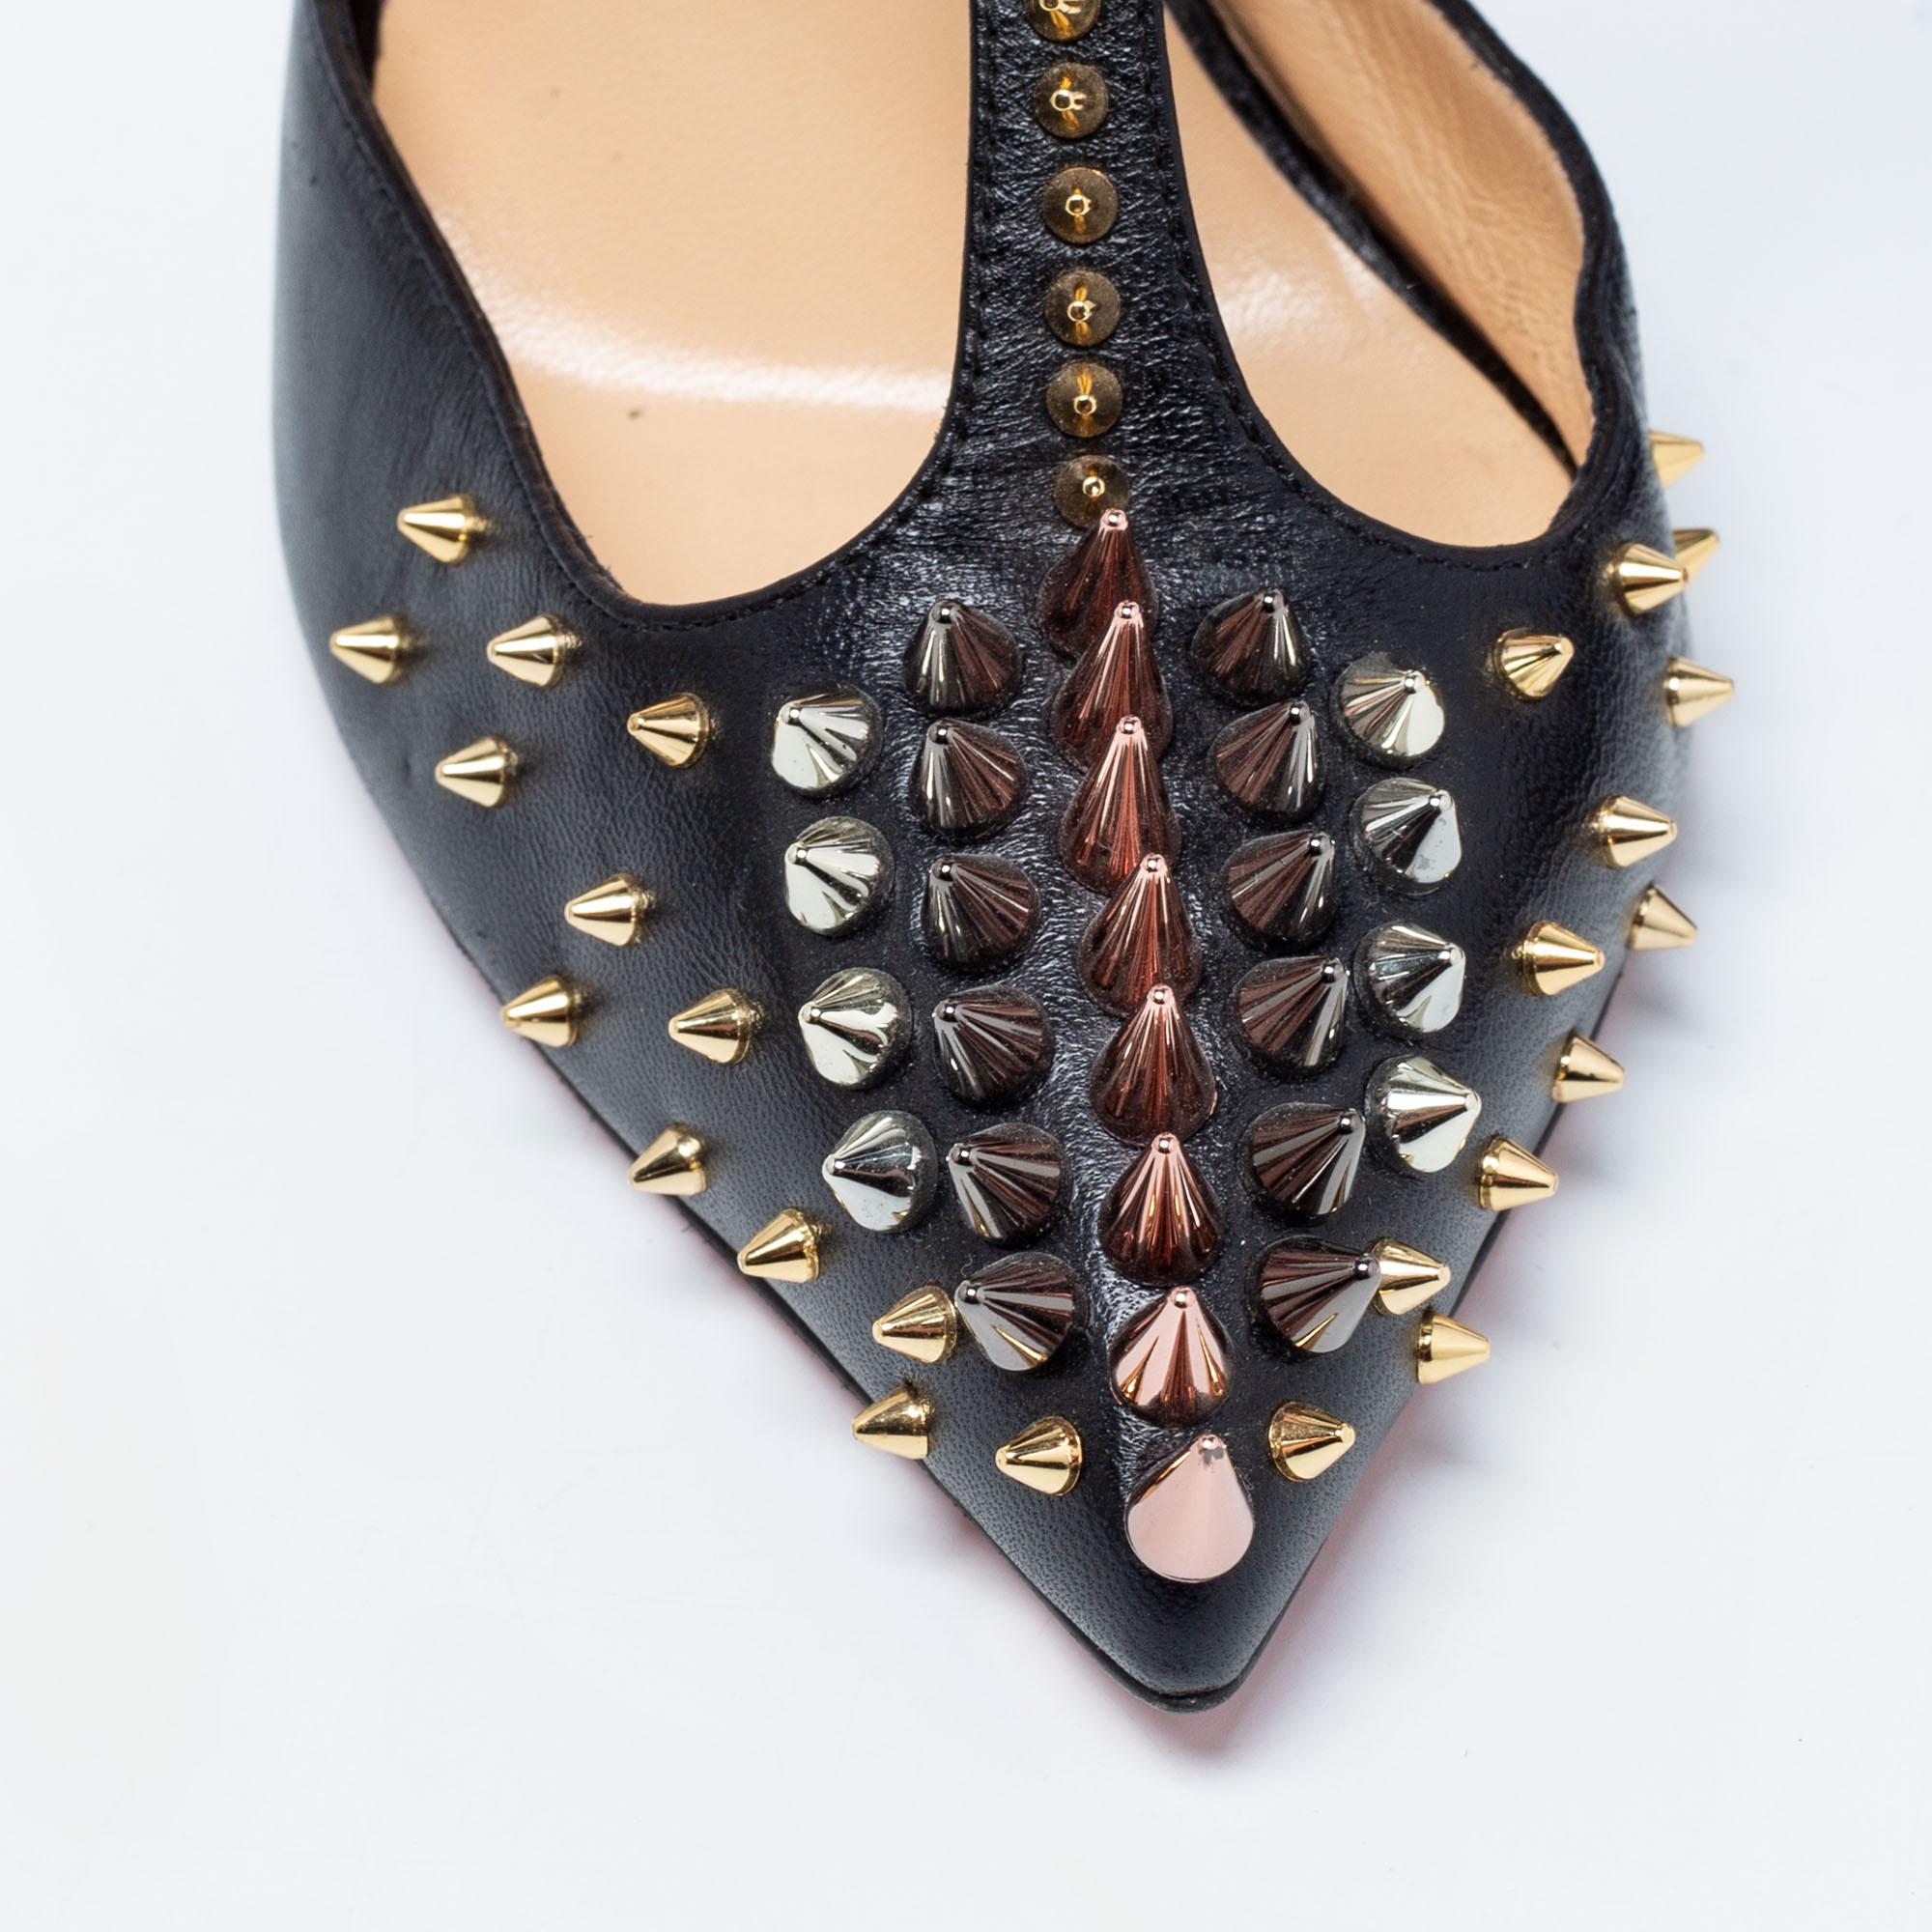 Christian Louboutin Black Leather Goldostrap Spiked Pumps Size 39.5 2